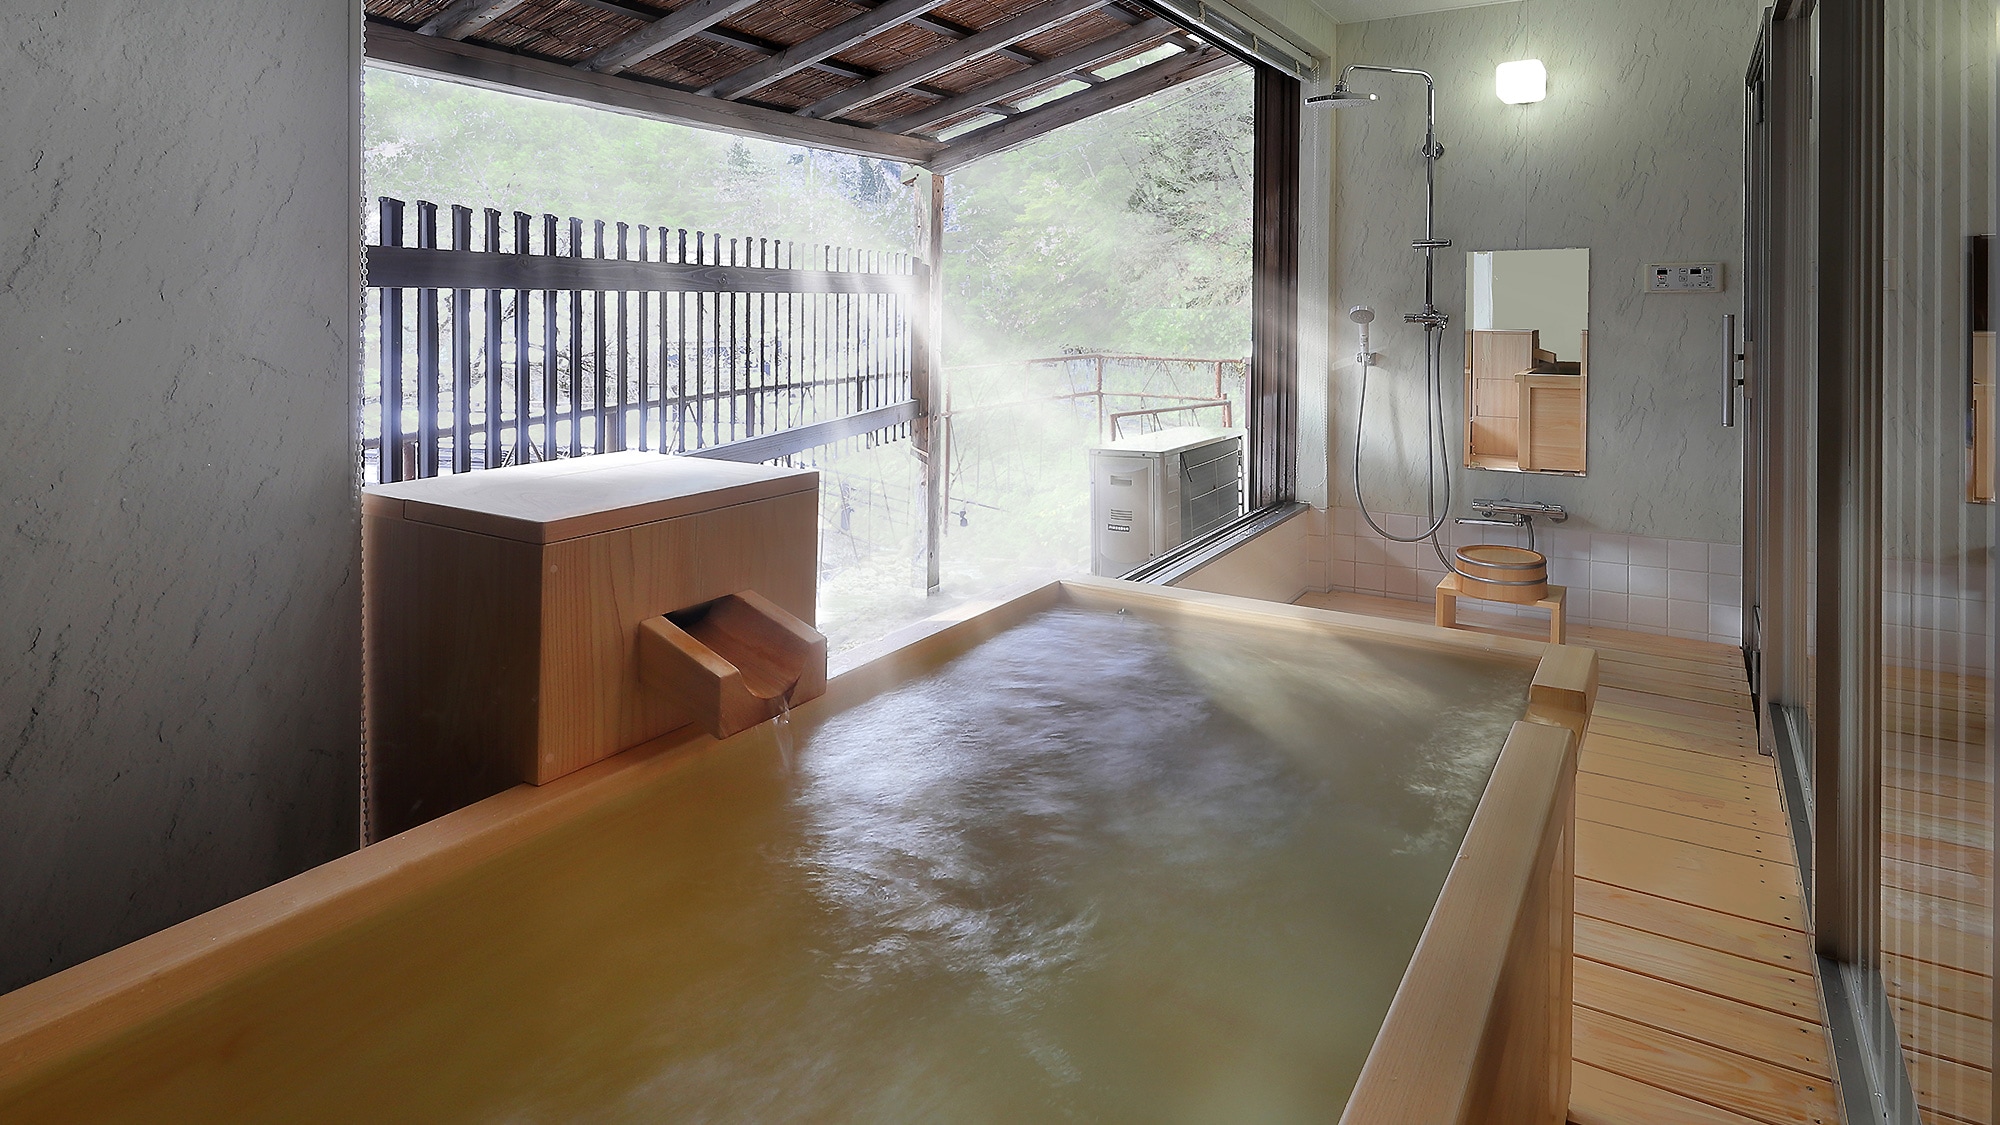 [Hatsune] Japanese-Western style room with a semi-open-air cypress bath that flows directly from the source